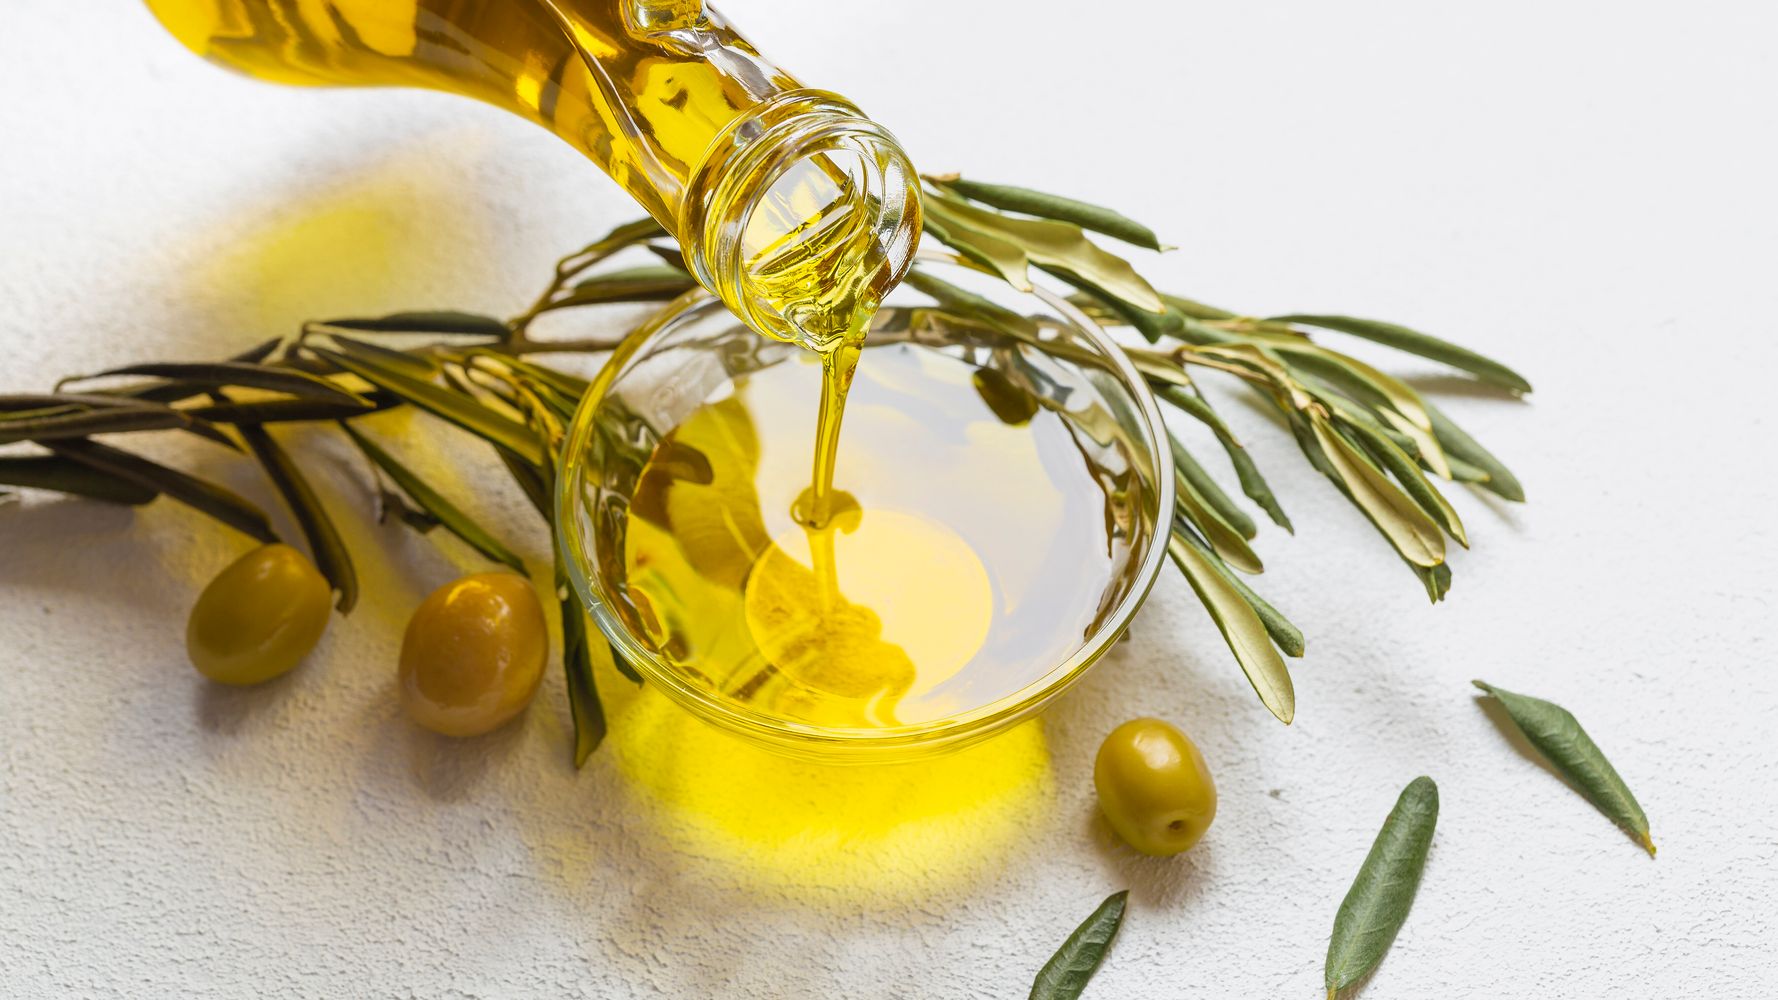 Is Olive Oil Good For Us Or Not? Here's What Experts Argue About.